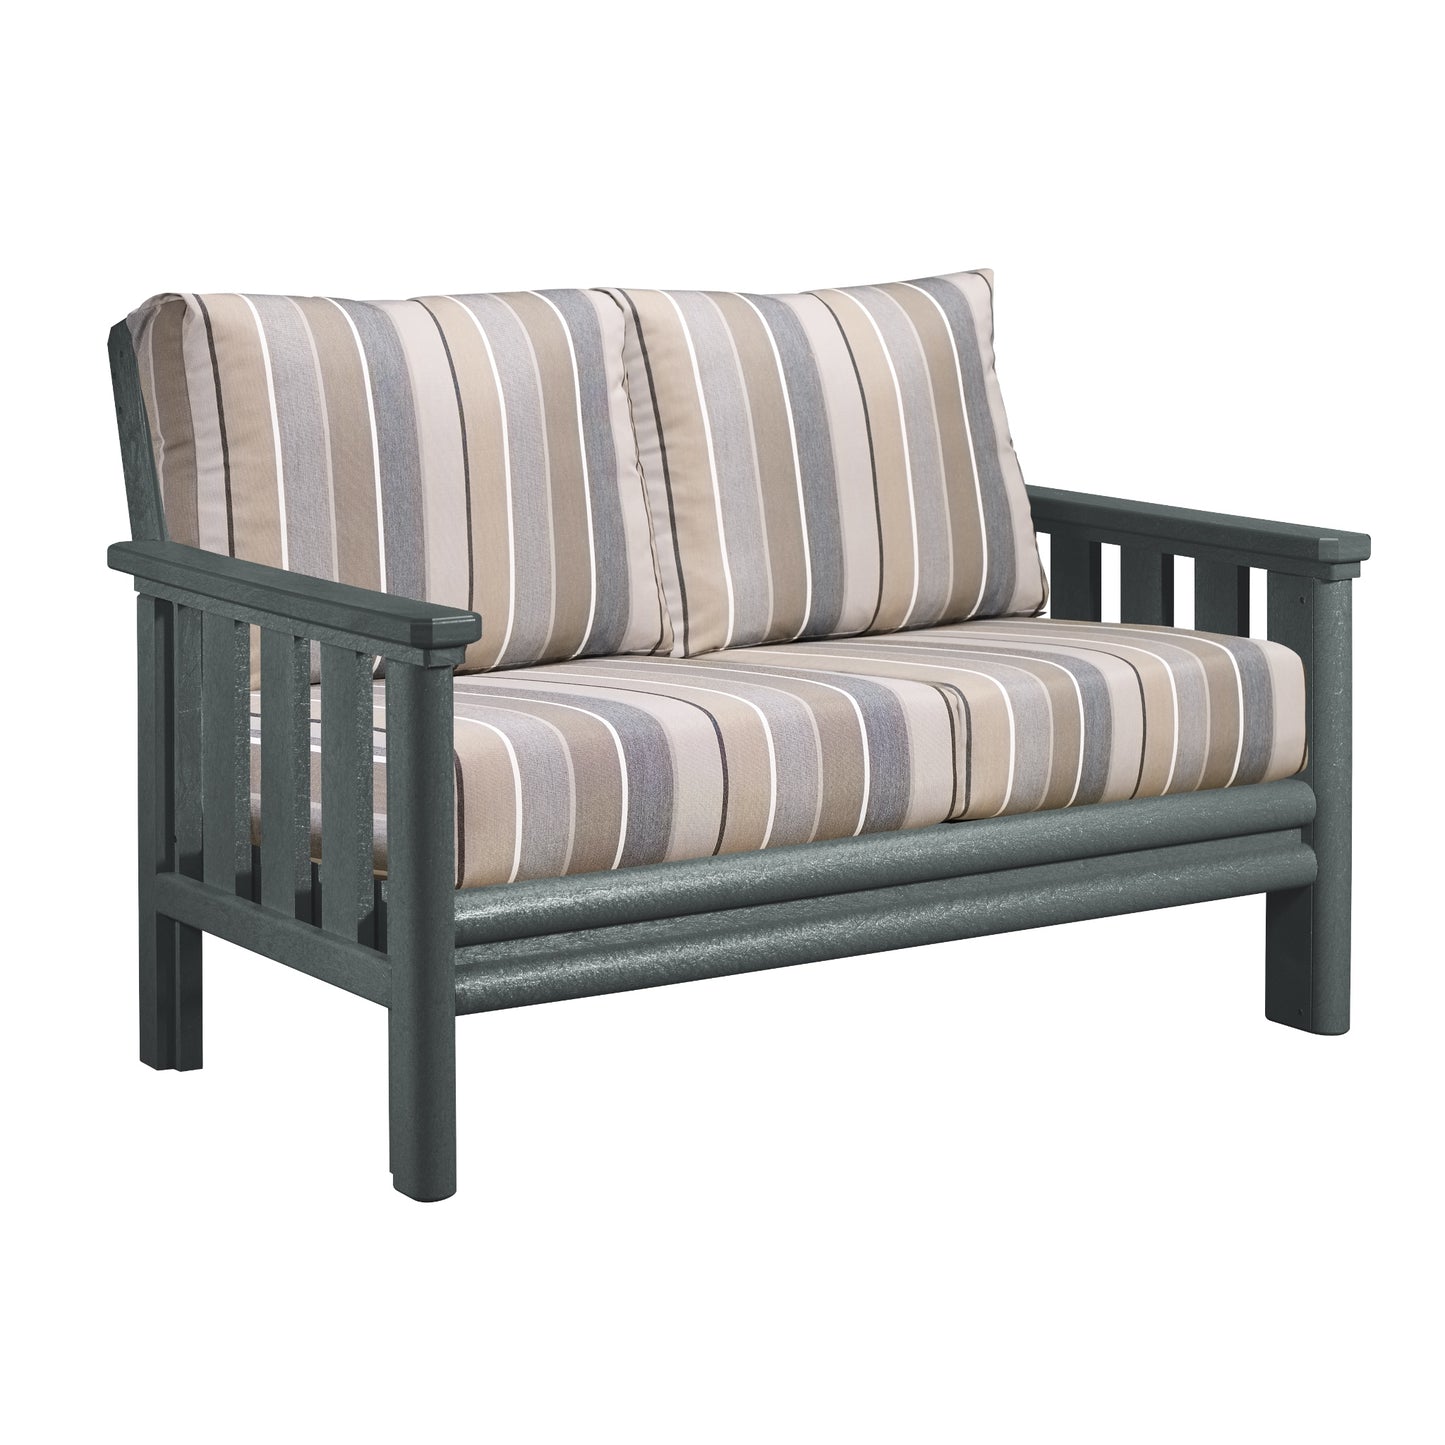 Stratford Loveseat SLATE GREY FRAME WITH CUSHIONS - DSF262